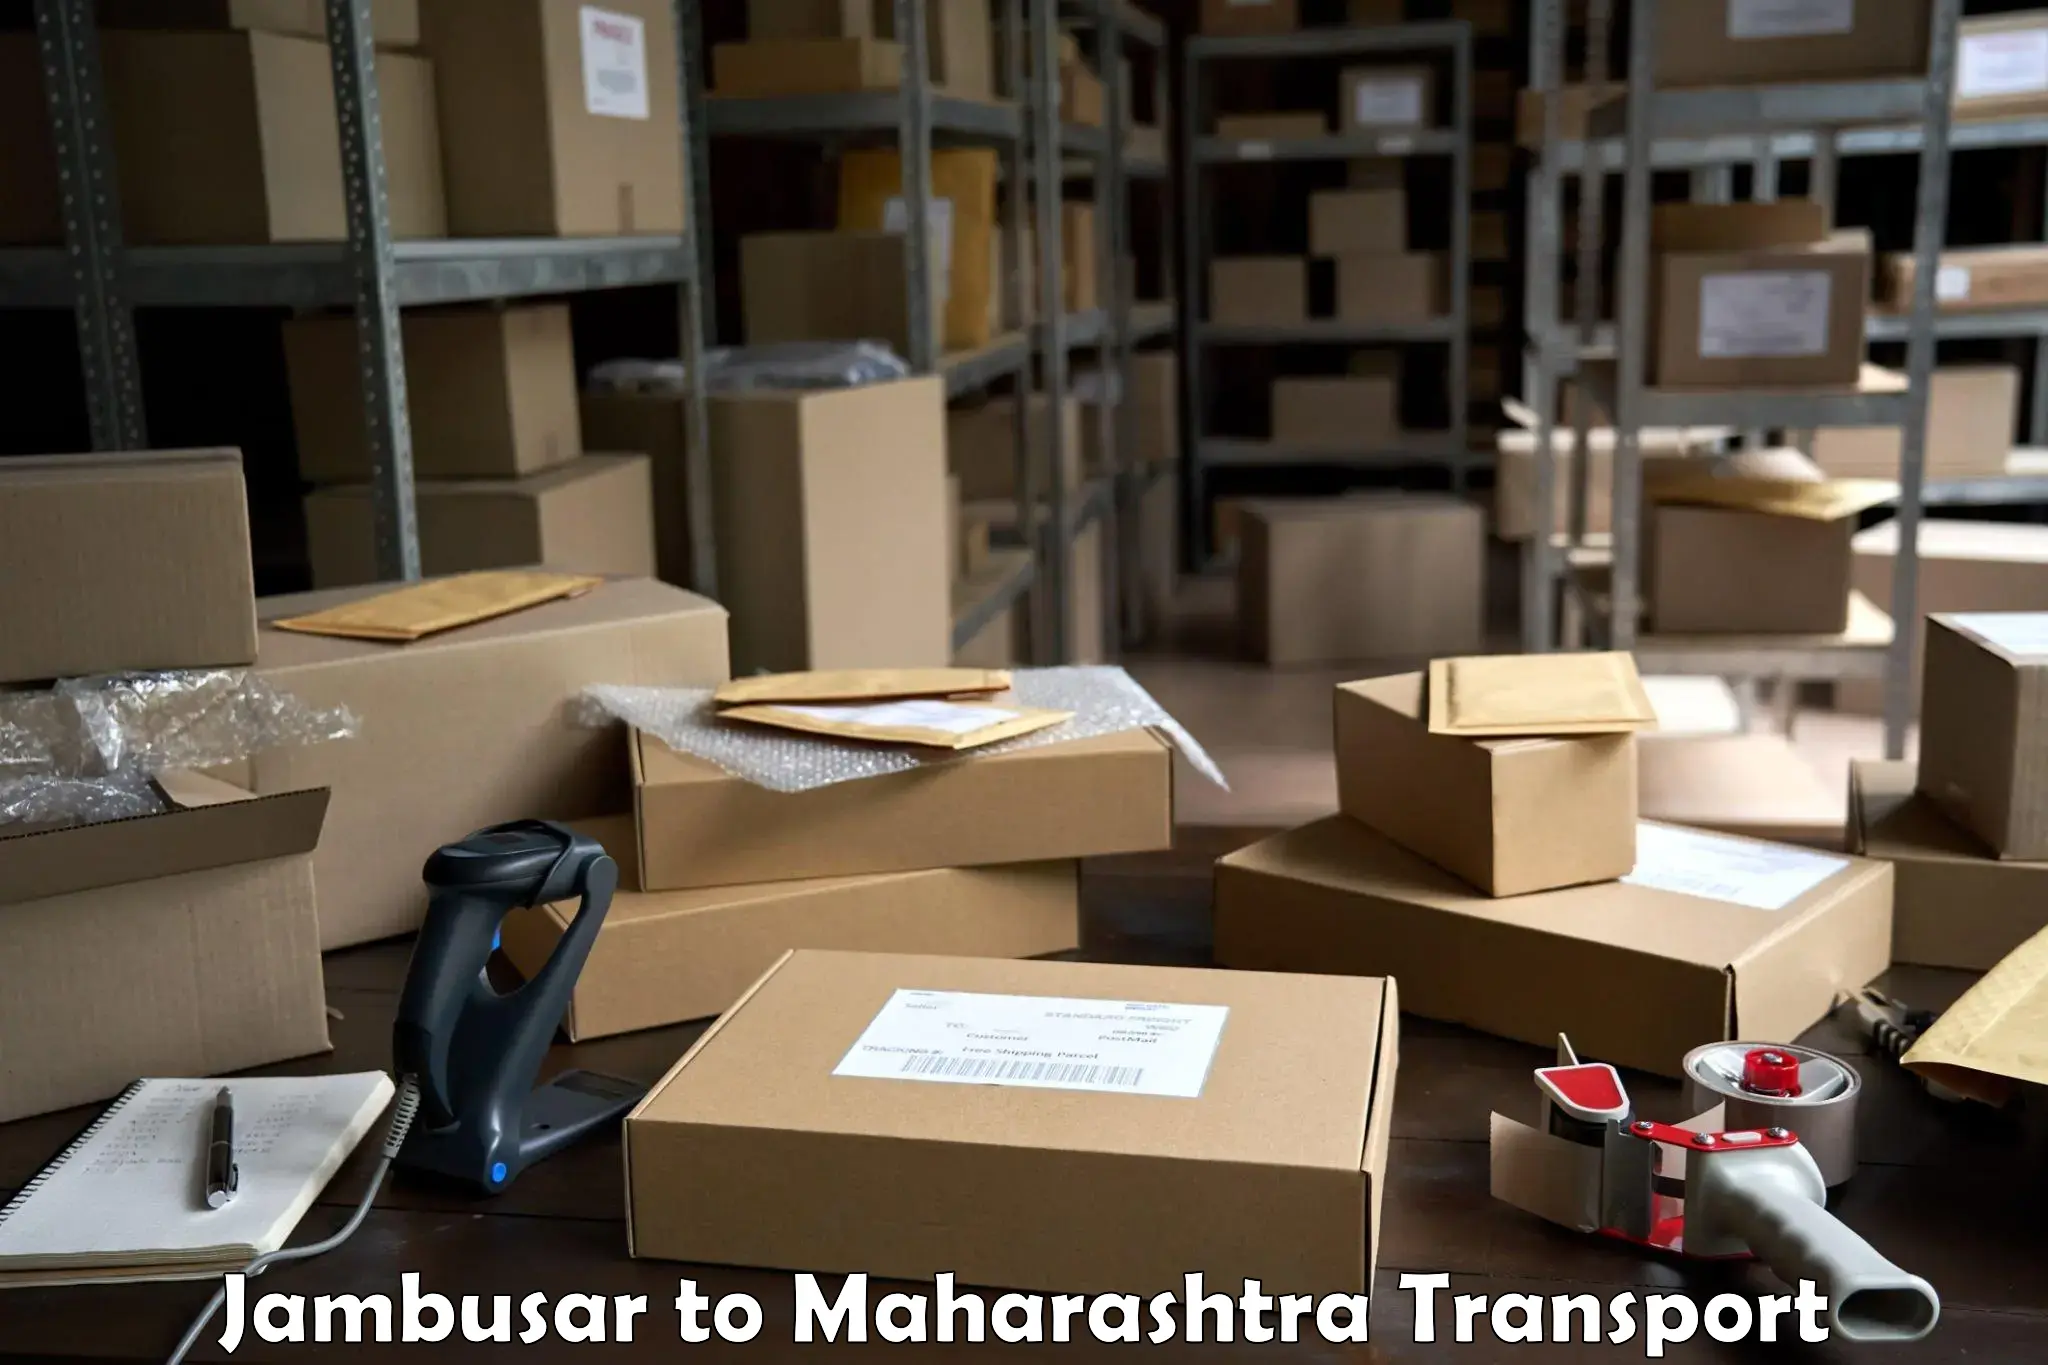 Truck transport companies in India Jambusar to Gangakher